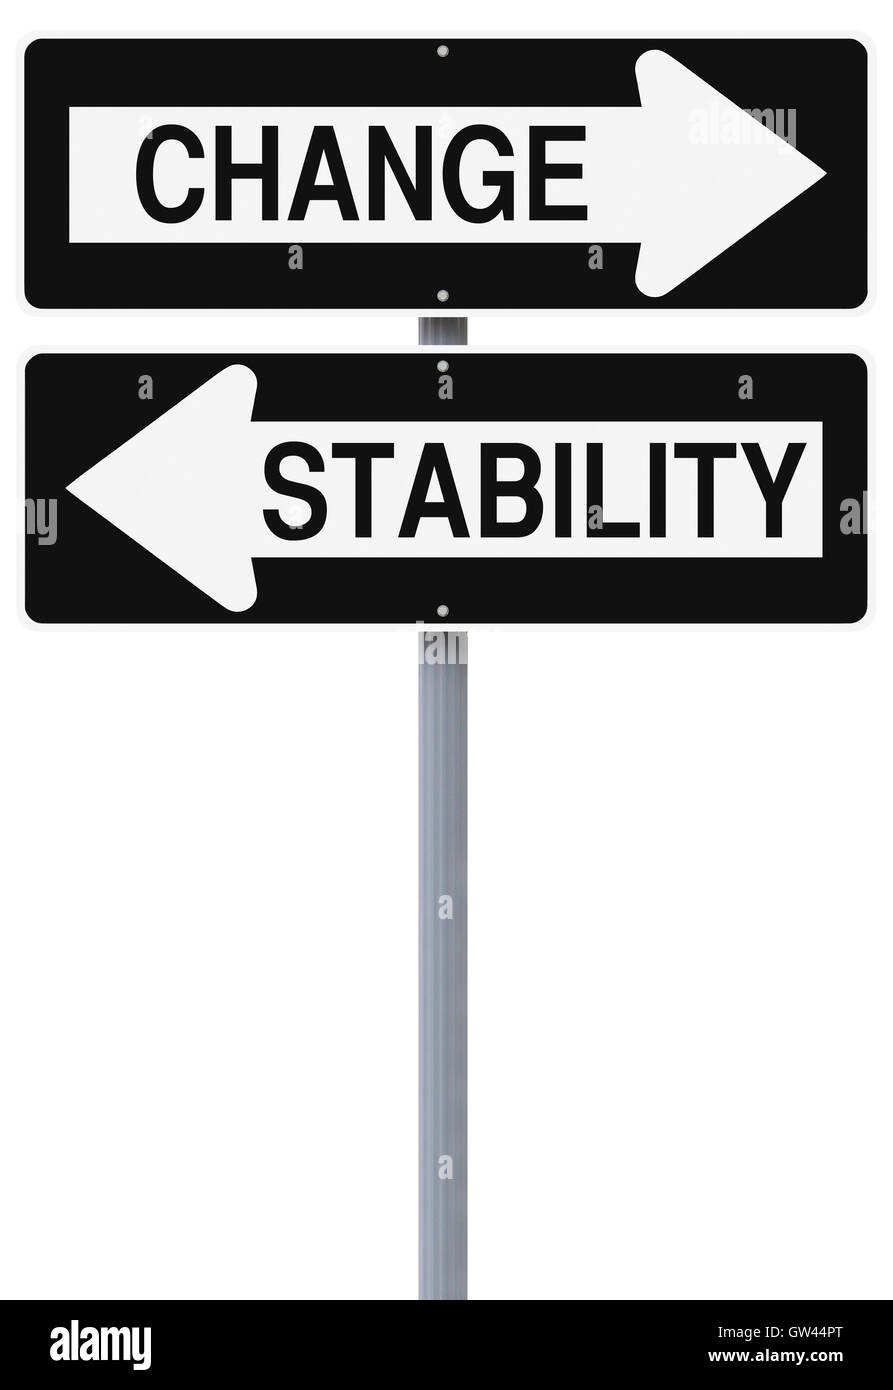 Stability or Change Stock Photo